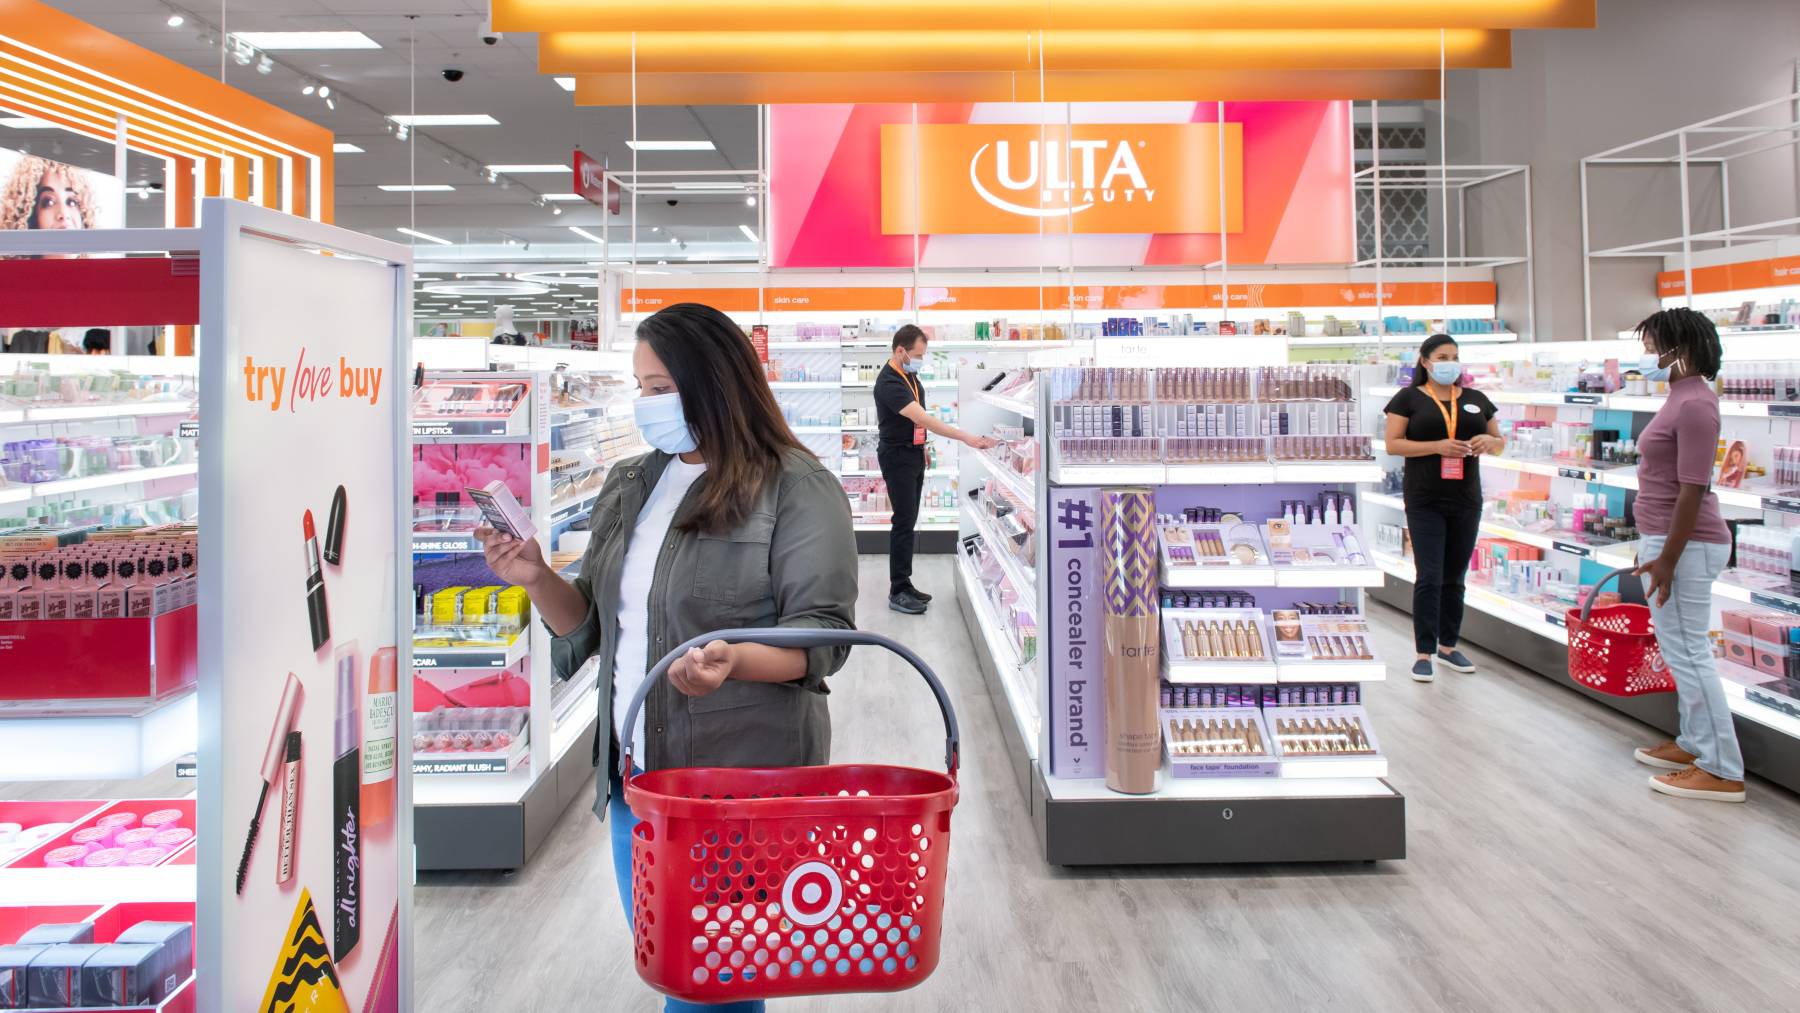 Target will open 100 Ulta shops in its stores this month. Courtesy Ulta/Target.